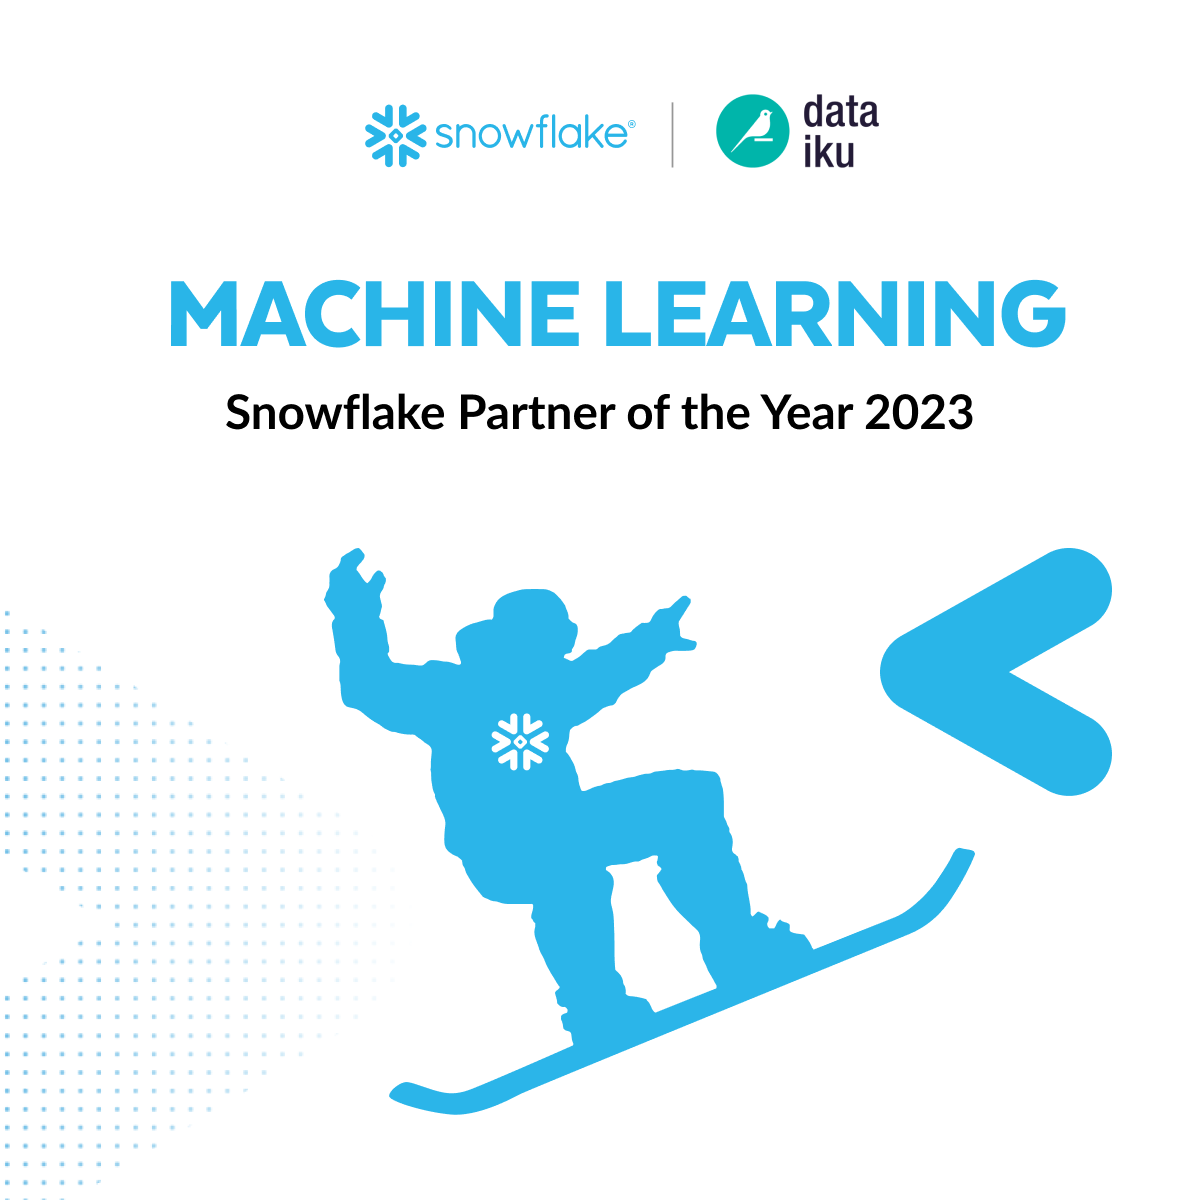 snowflake partner of the year 2023